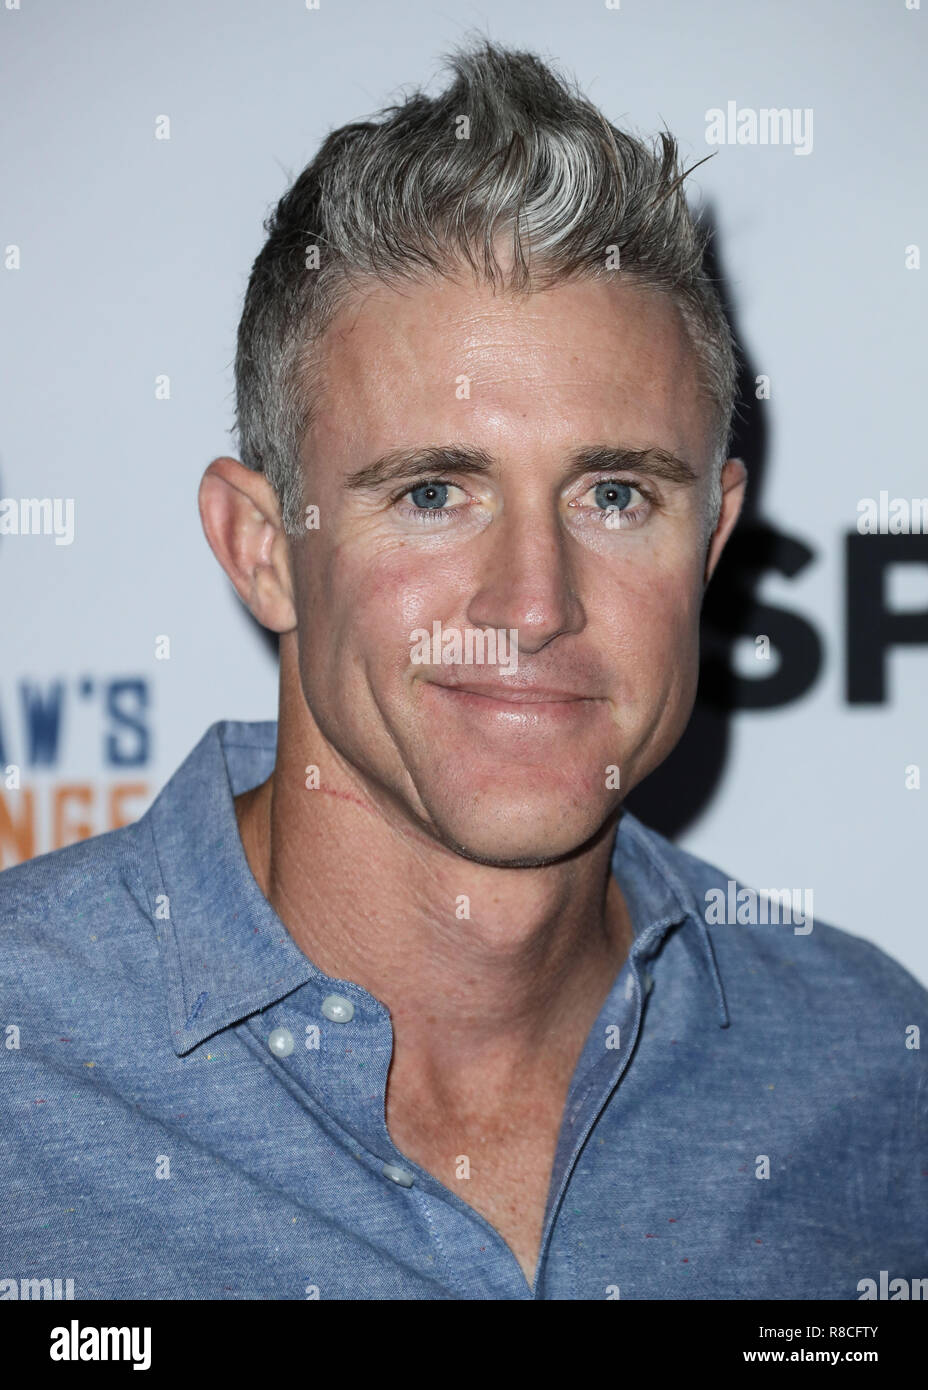 LOS ANGELES, CA, USA - AUGUST 23: Chase Utley at the 6th Annual